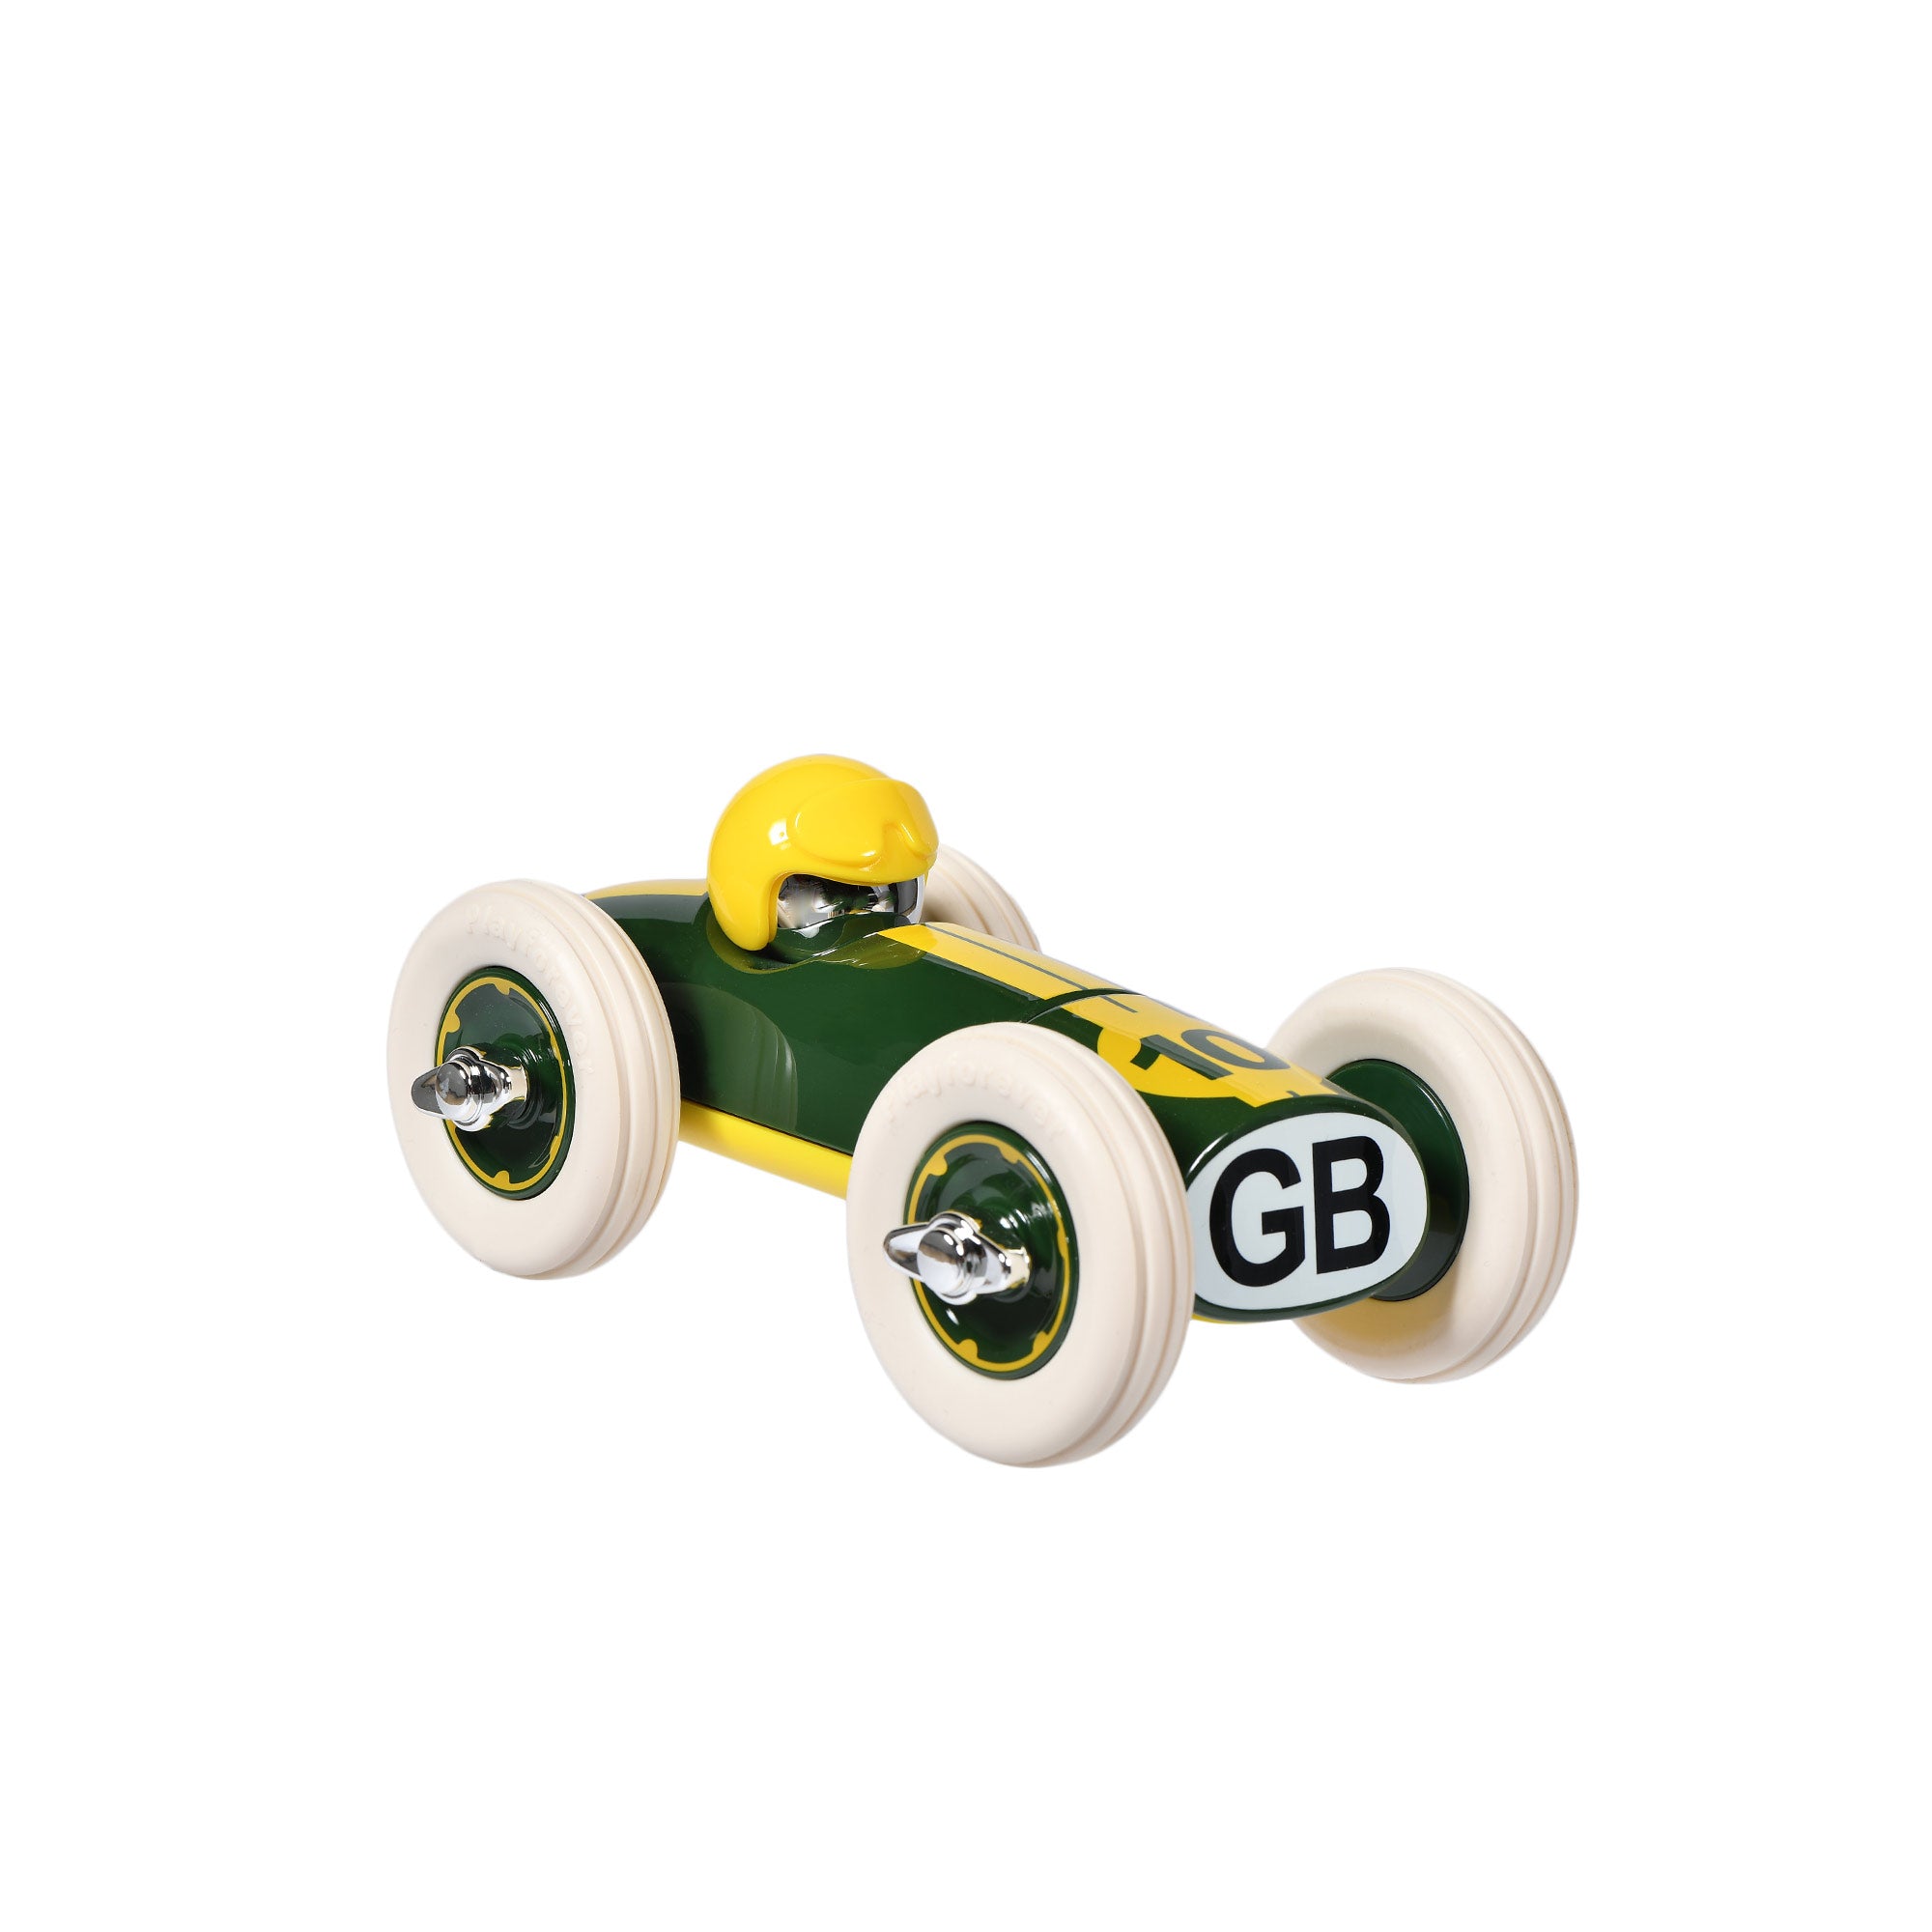 407 Bonnie GB - Green and Yellow Car image 6